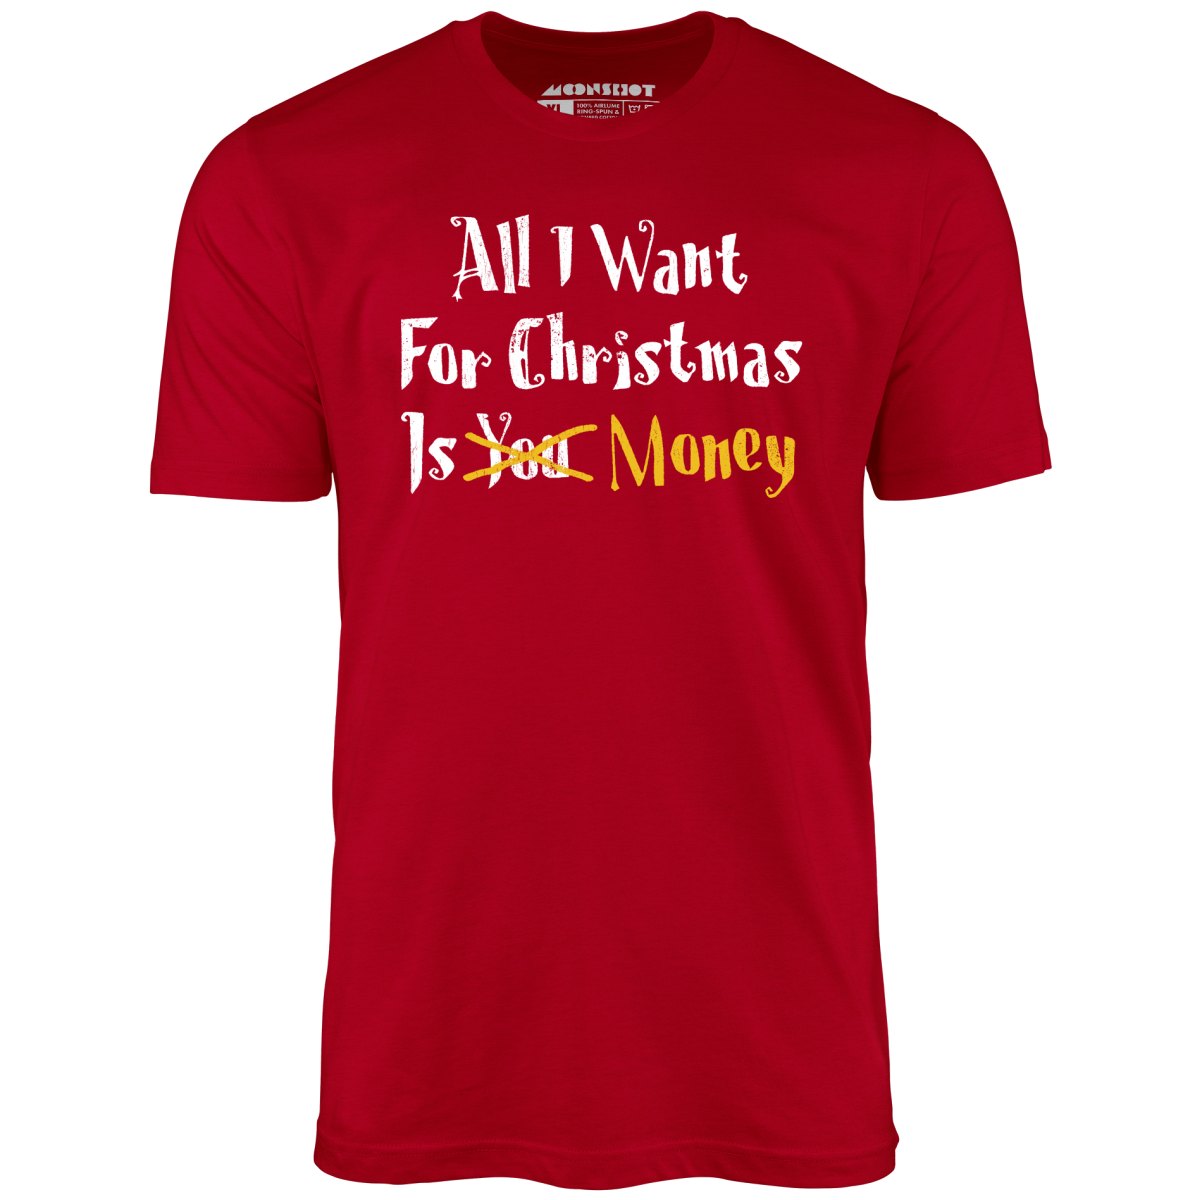 All I Want for Christmas is Money - Unisex T-Shirt